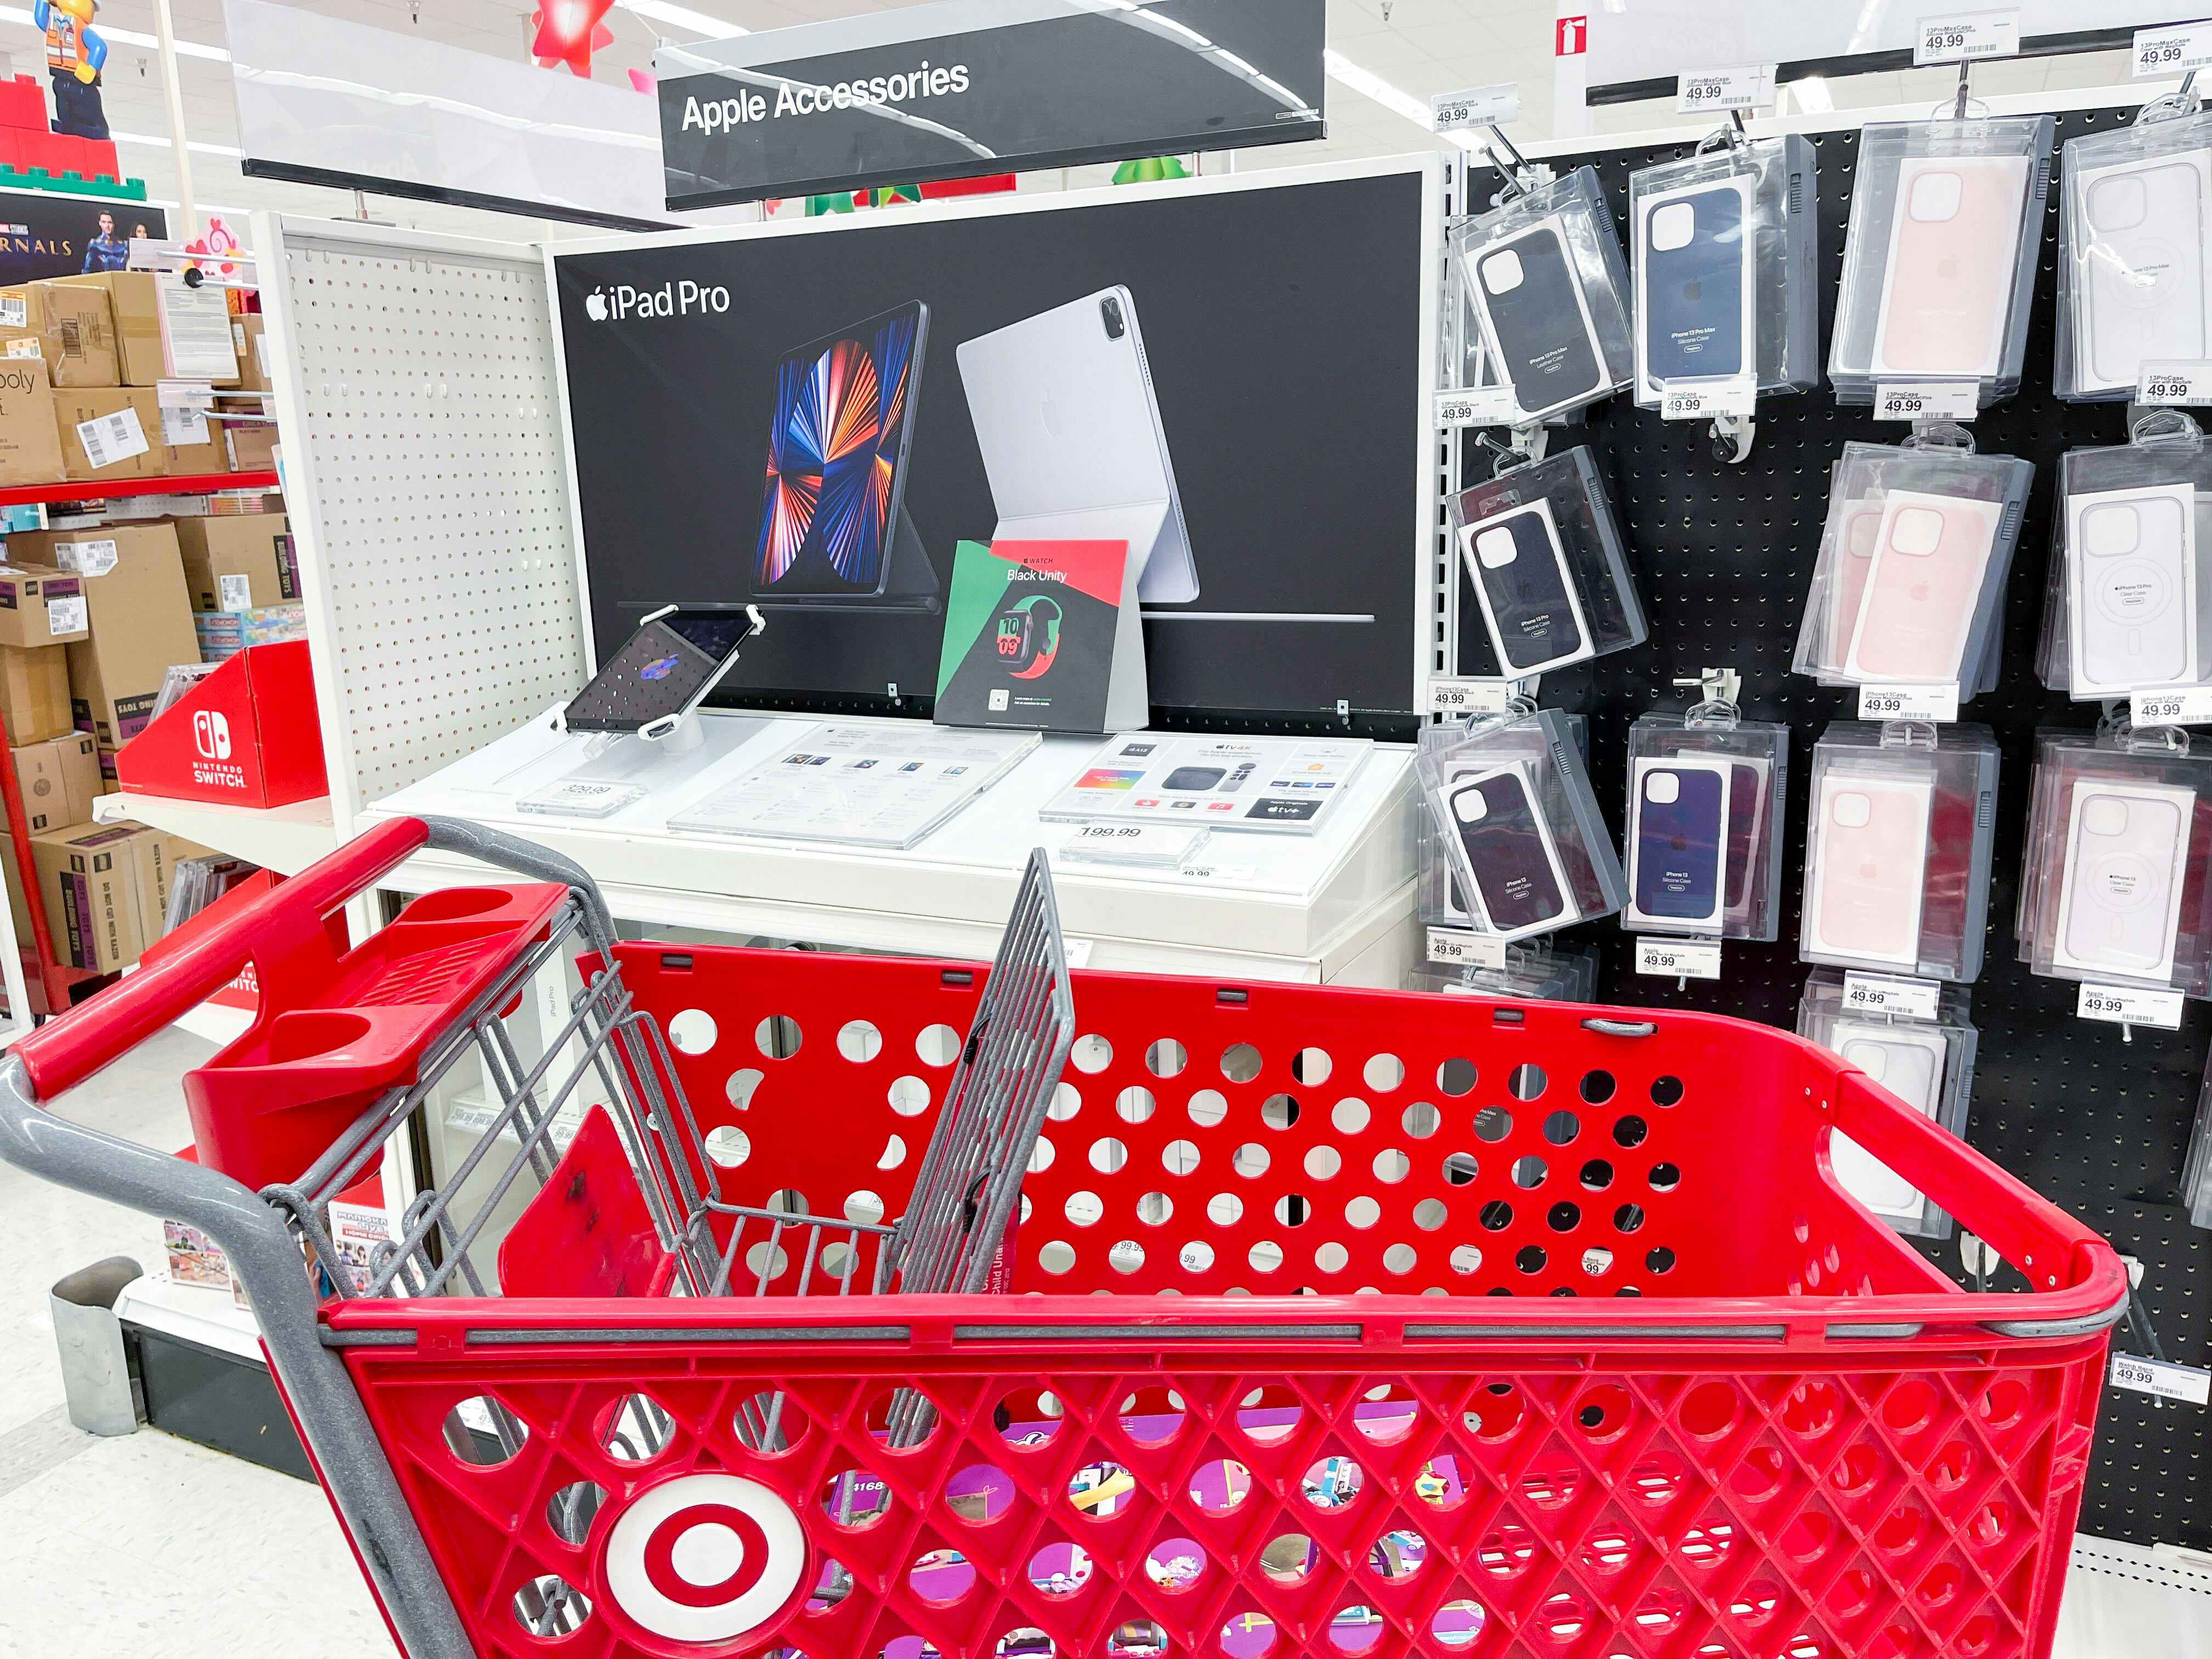 How to Shop Apple at Target: Get the Best Deals on the Devices You Want